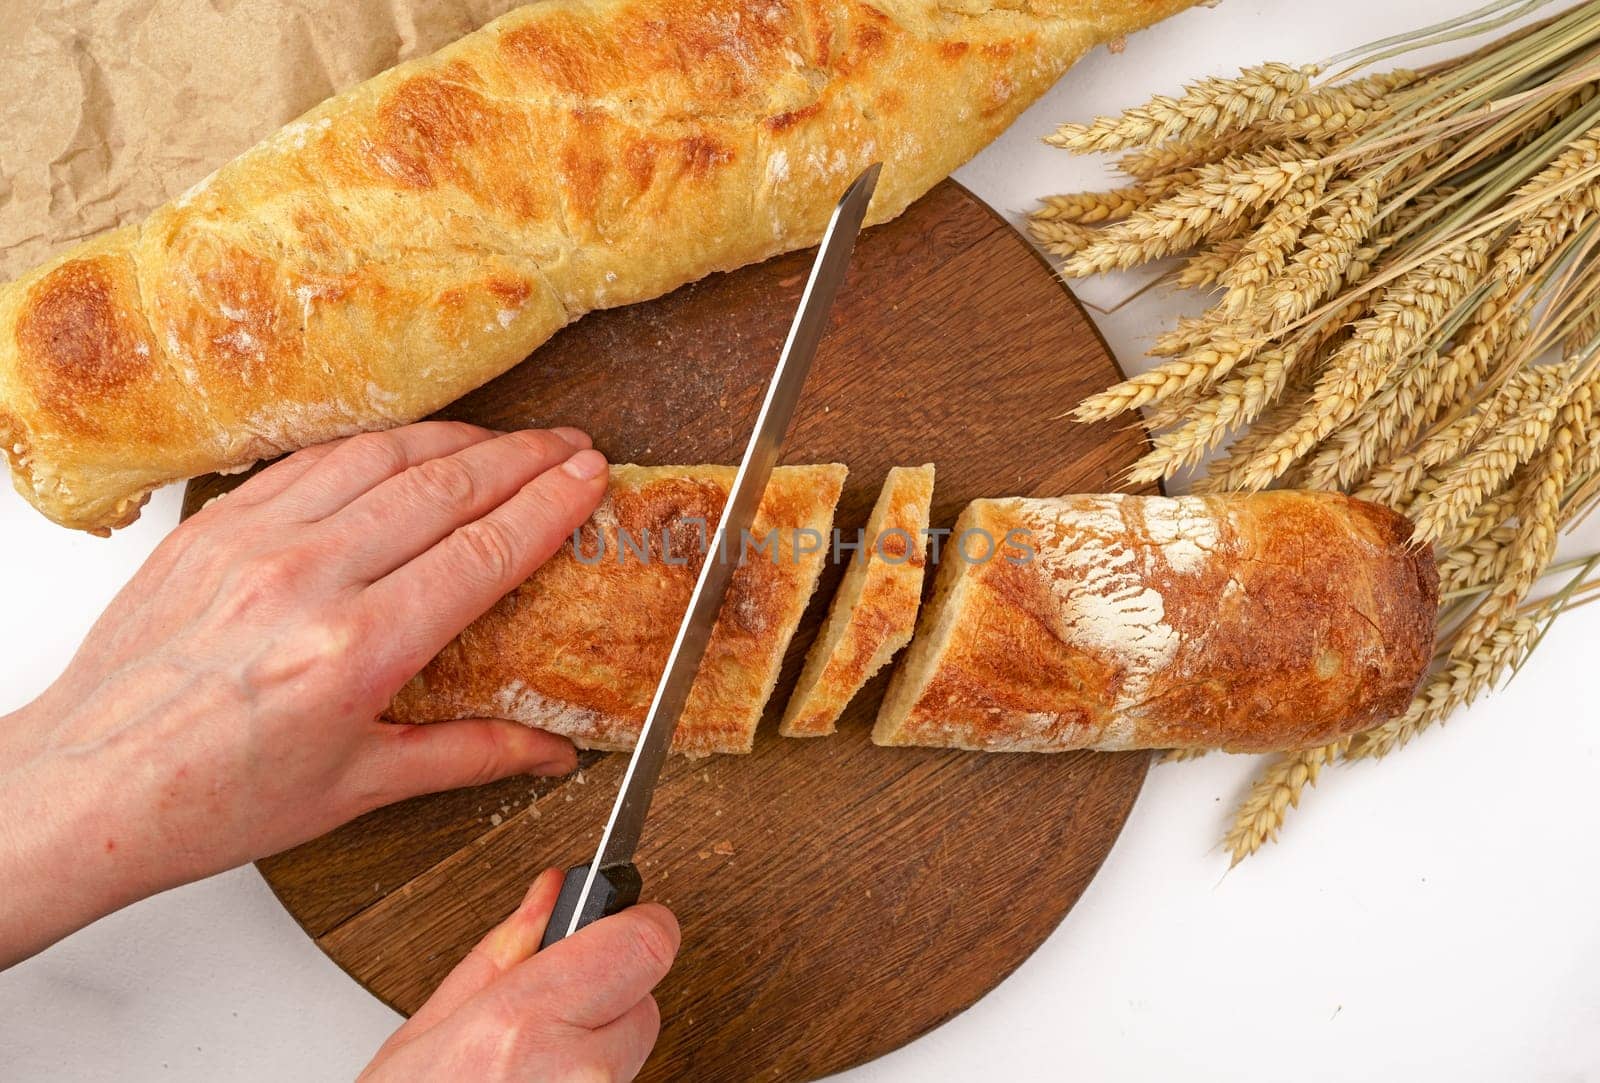 Slicing French Baguette On Slice For Bruschetta. Cutting Bread On Kitchen. Making Morning Breakfast. Fresh Bread On Table. Cutting French Baguette. Sliced White Wheat Baguette For Antipasto Bruschetta by aprilphoto